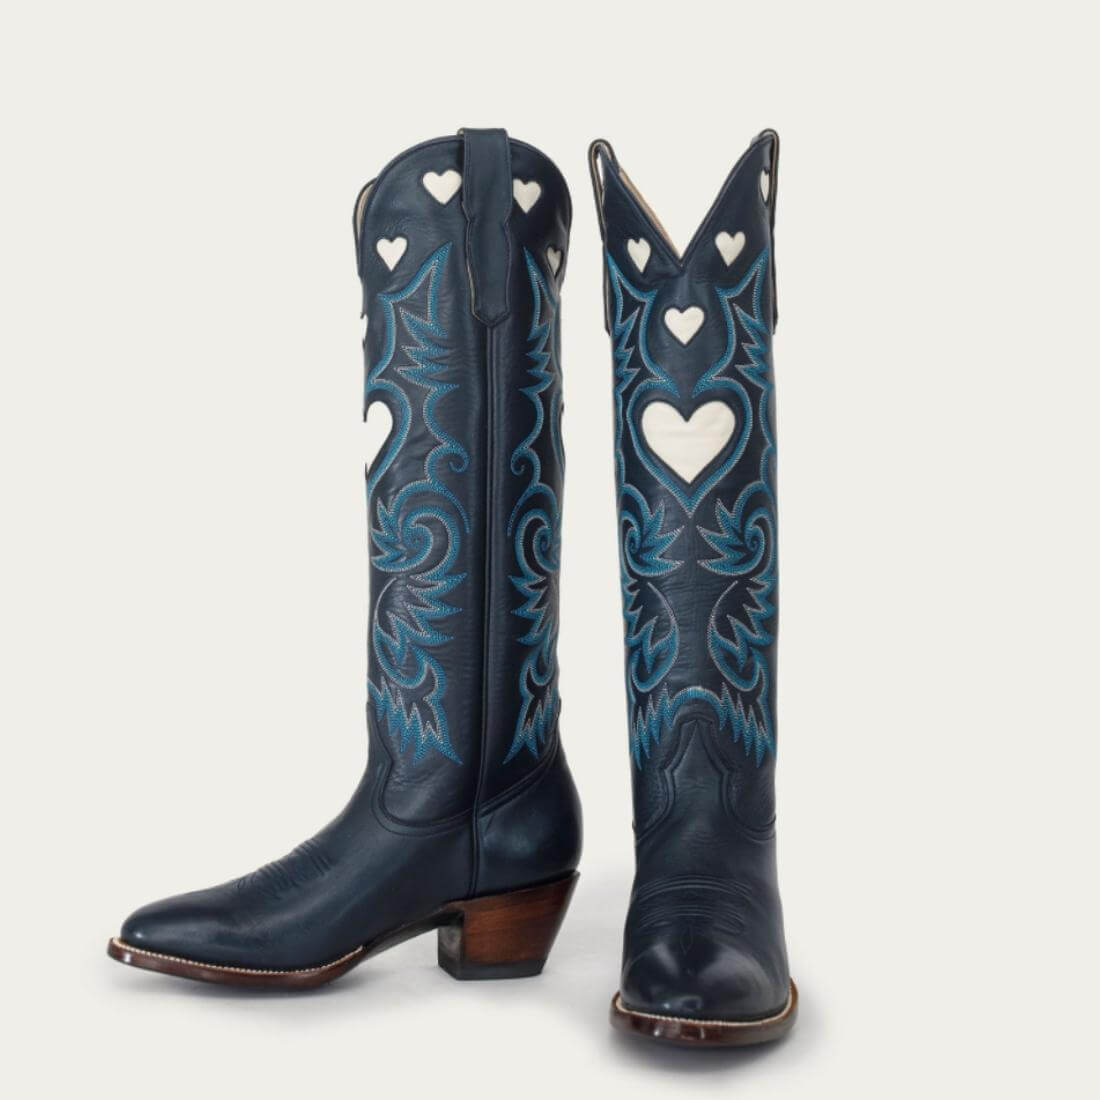 Navy Heart Boot Limited Edition, pair